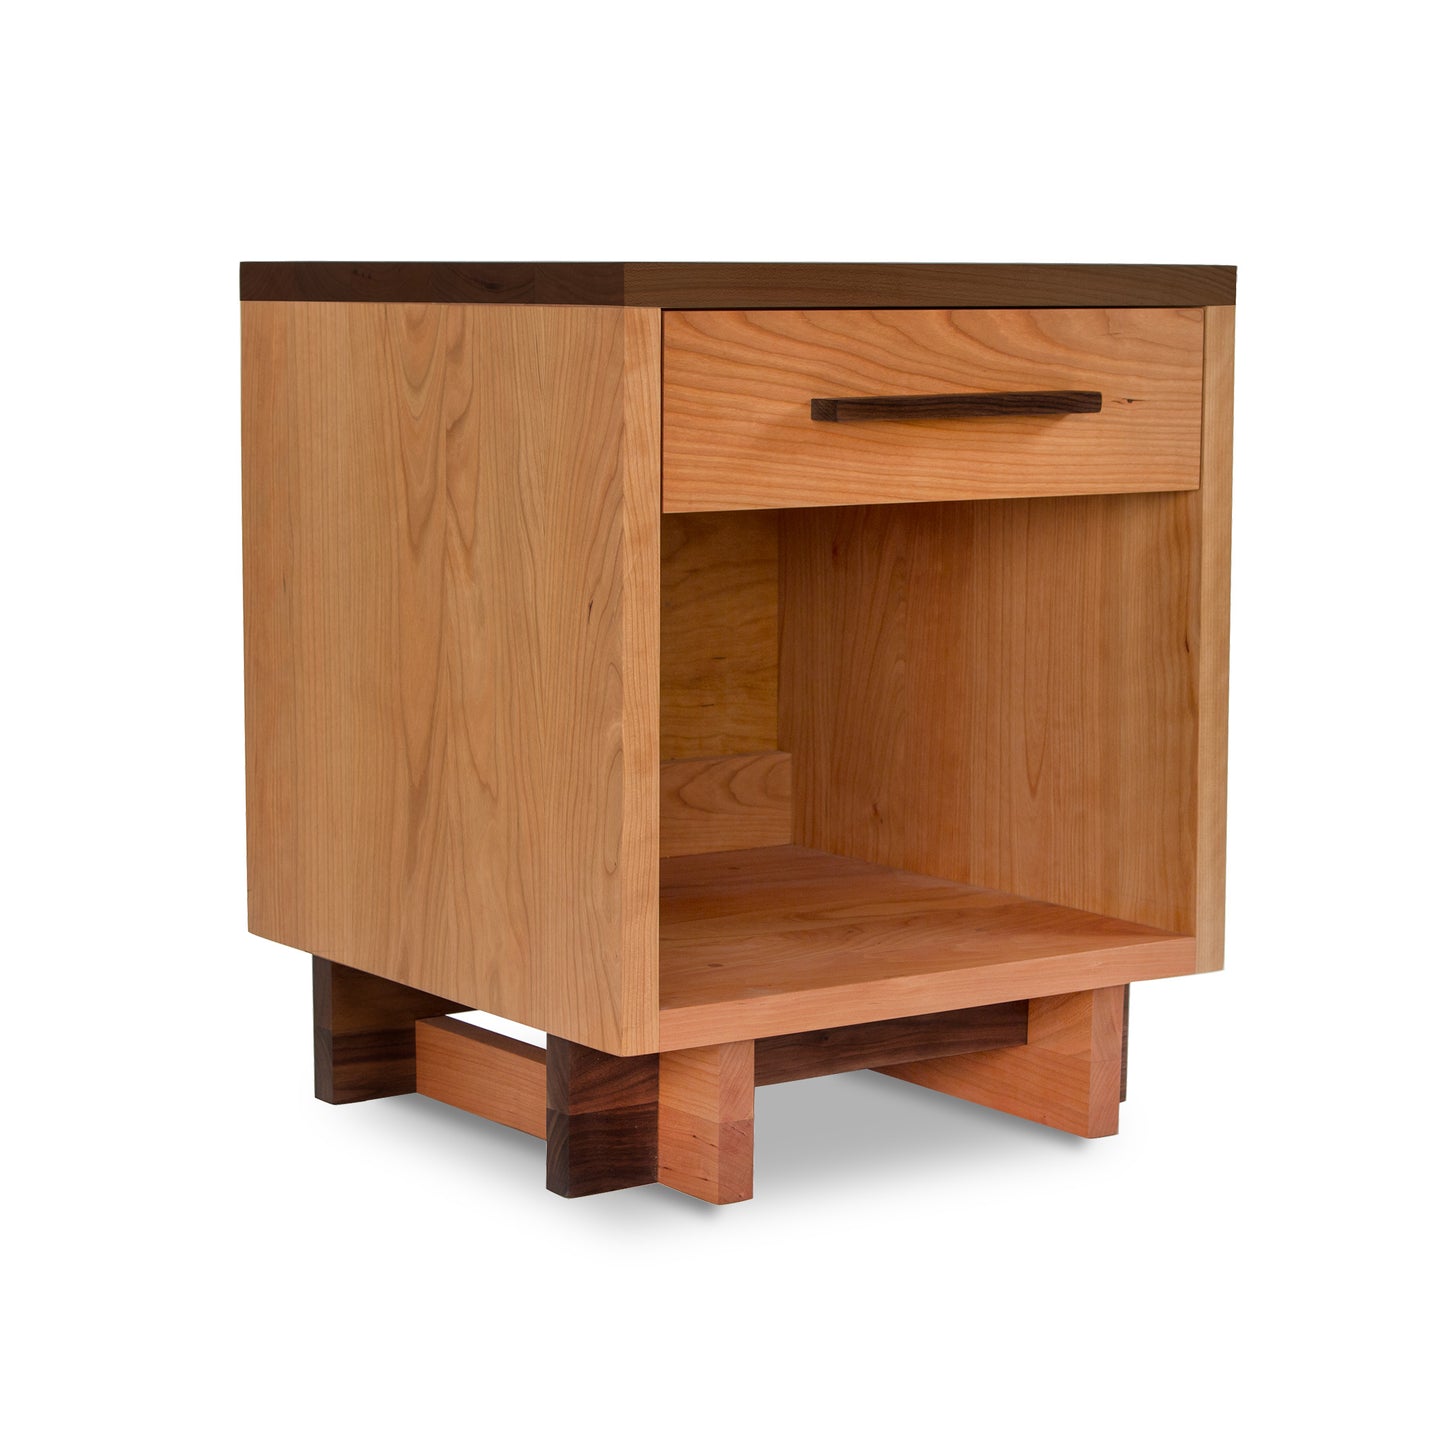 A Modern American 1-Drawer Enclosed Shelf Nightstand, handmade by Vermont Furniture Designs.